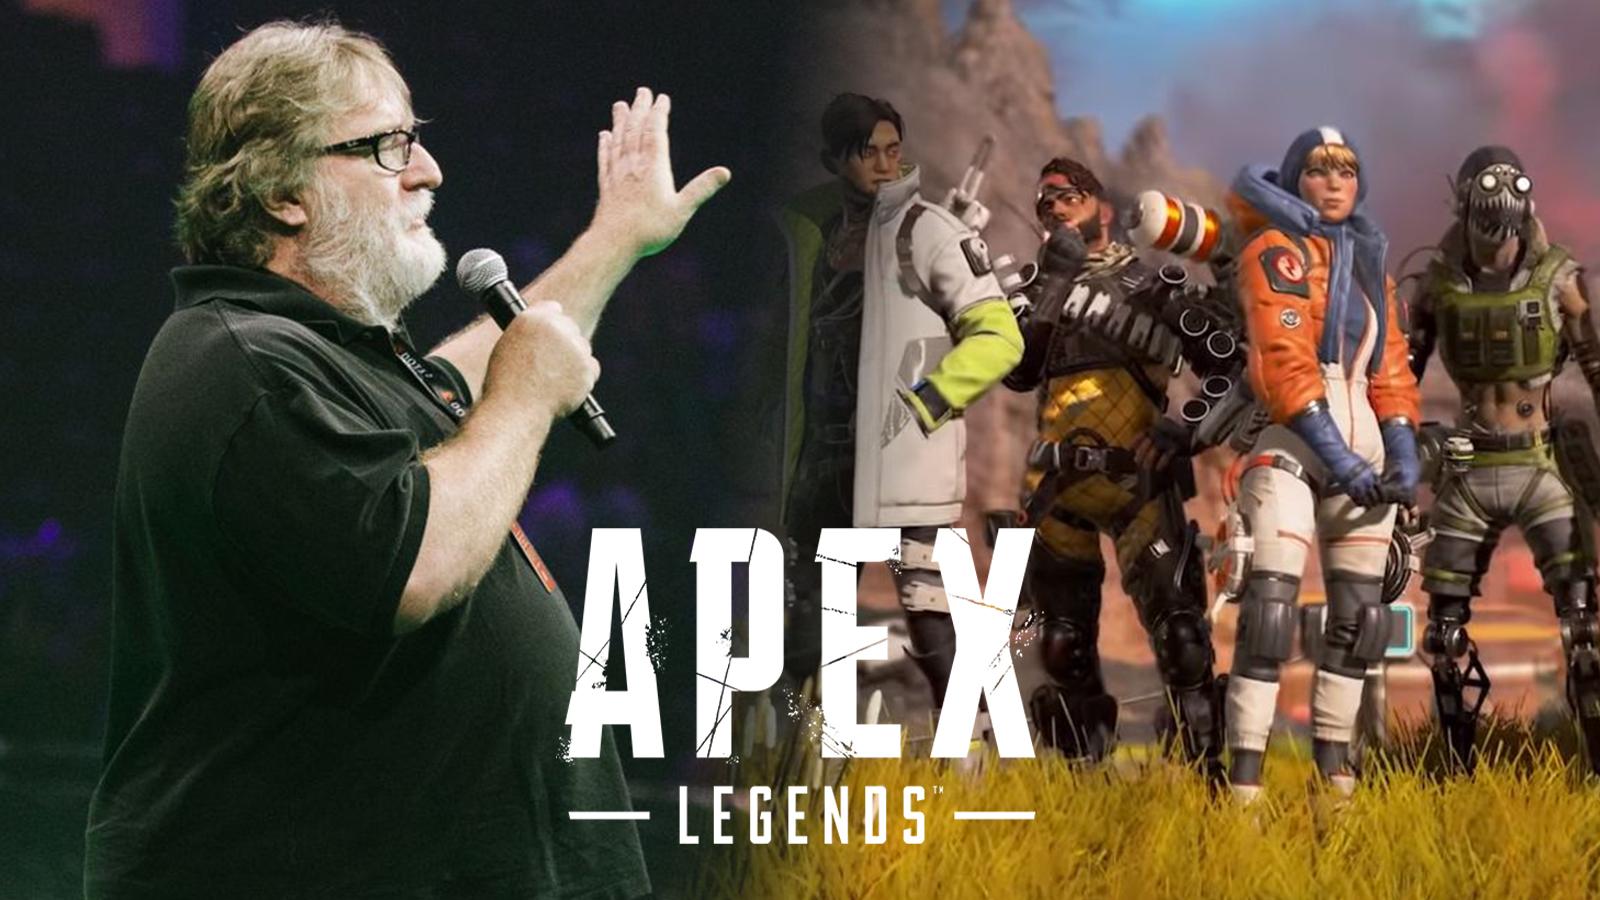 Valve's Gabe Newell wants to play Apex Legends for future game inspiration  - Dexerto